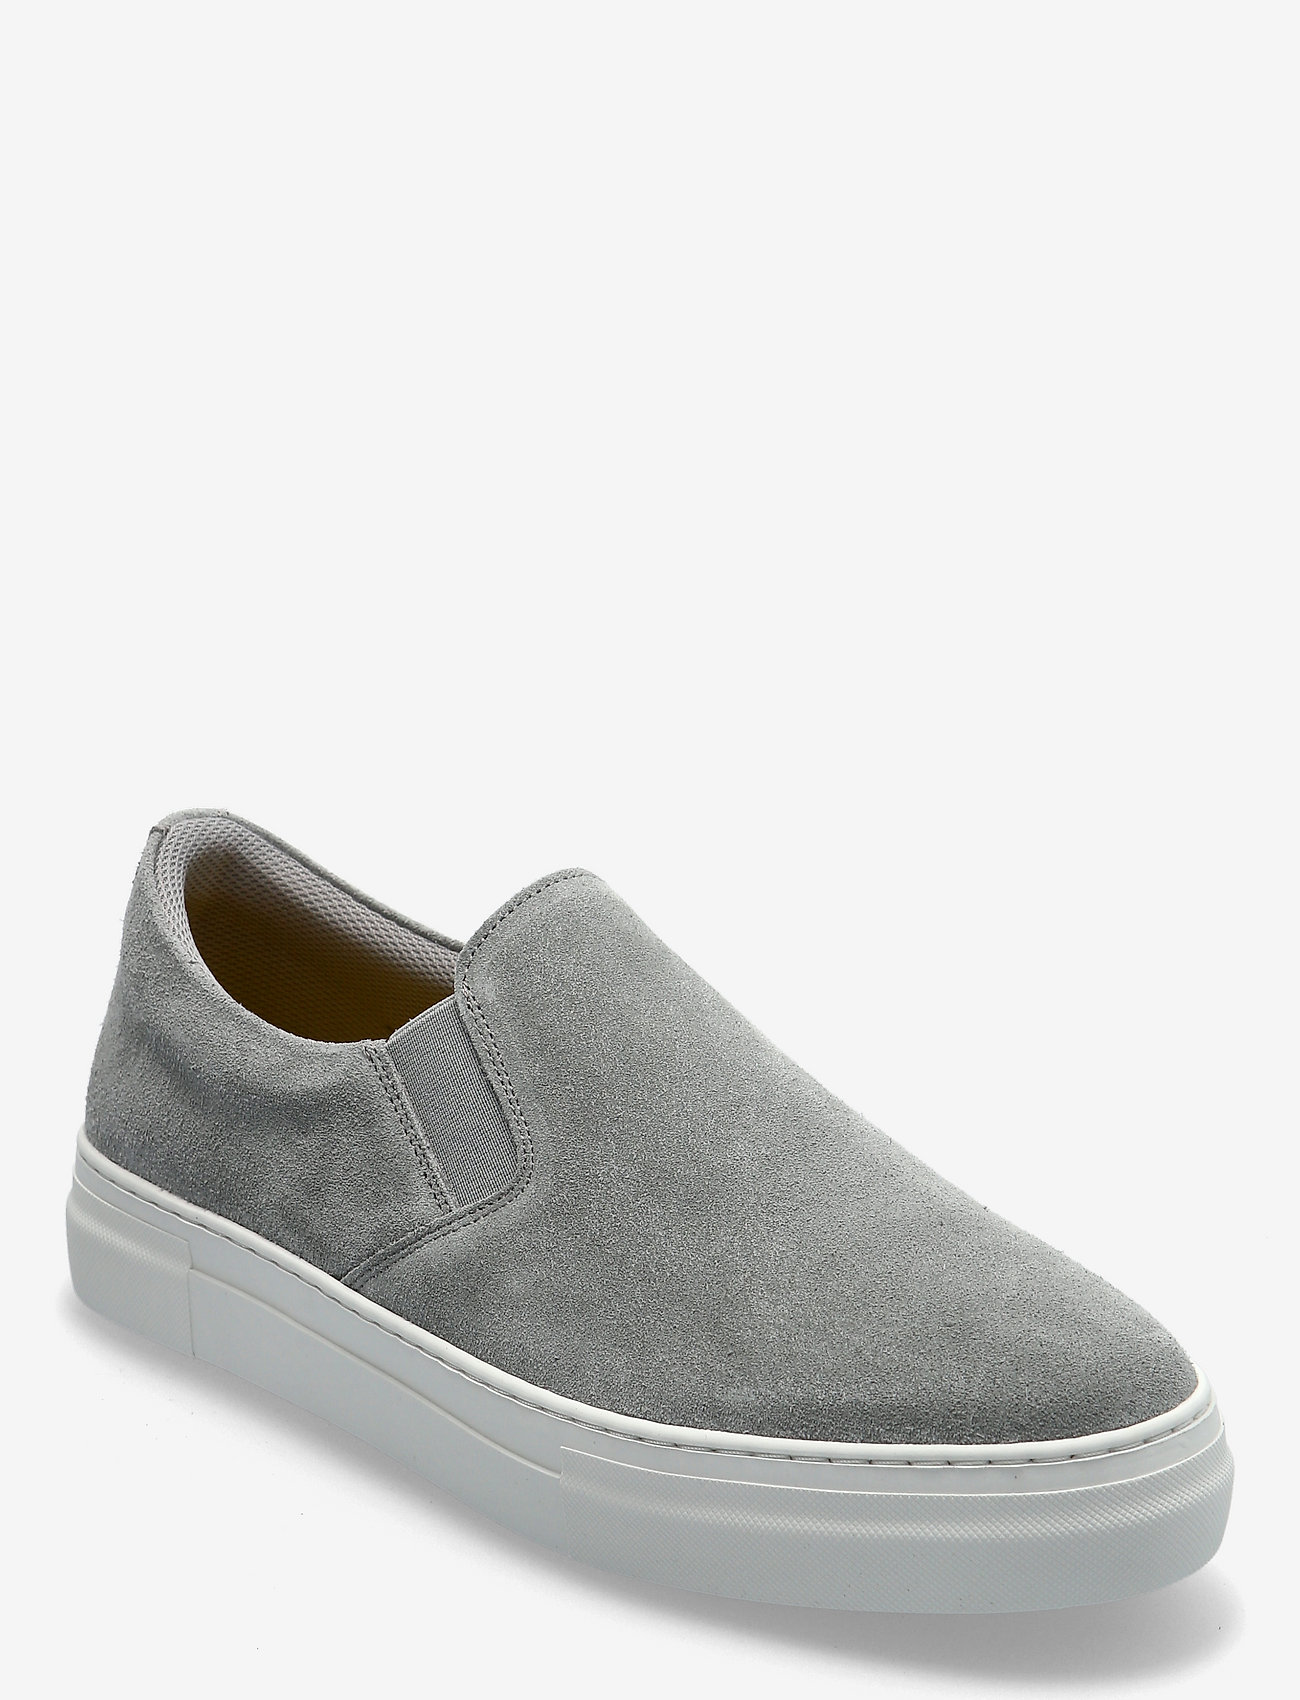 Selected Homme Chunky Suede Slipon B - Slip-on - Boozt.com